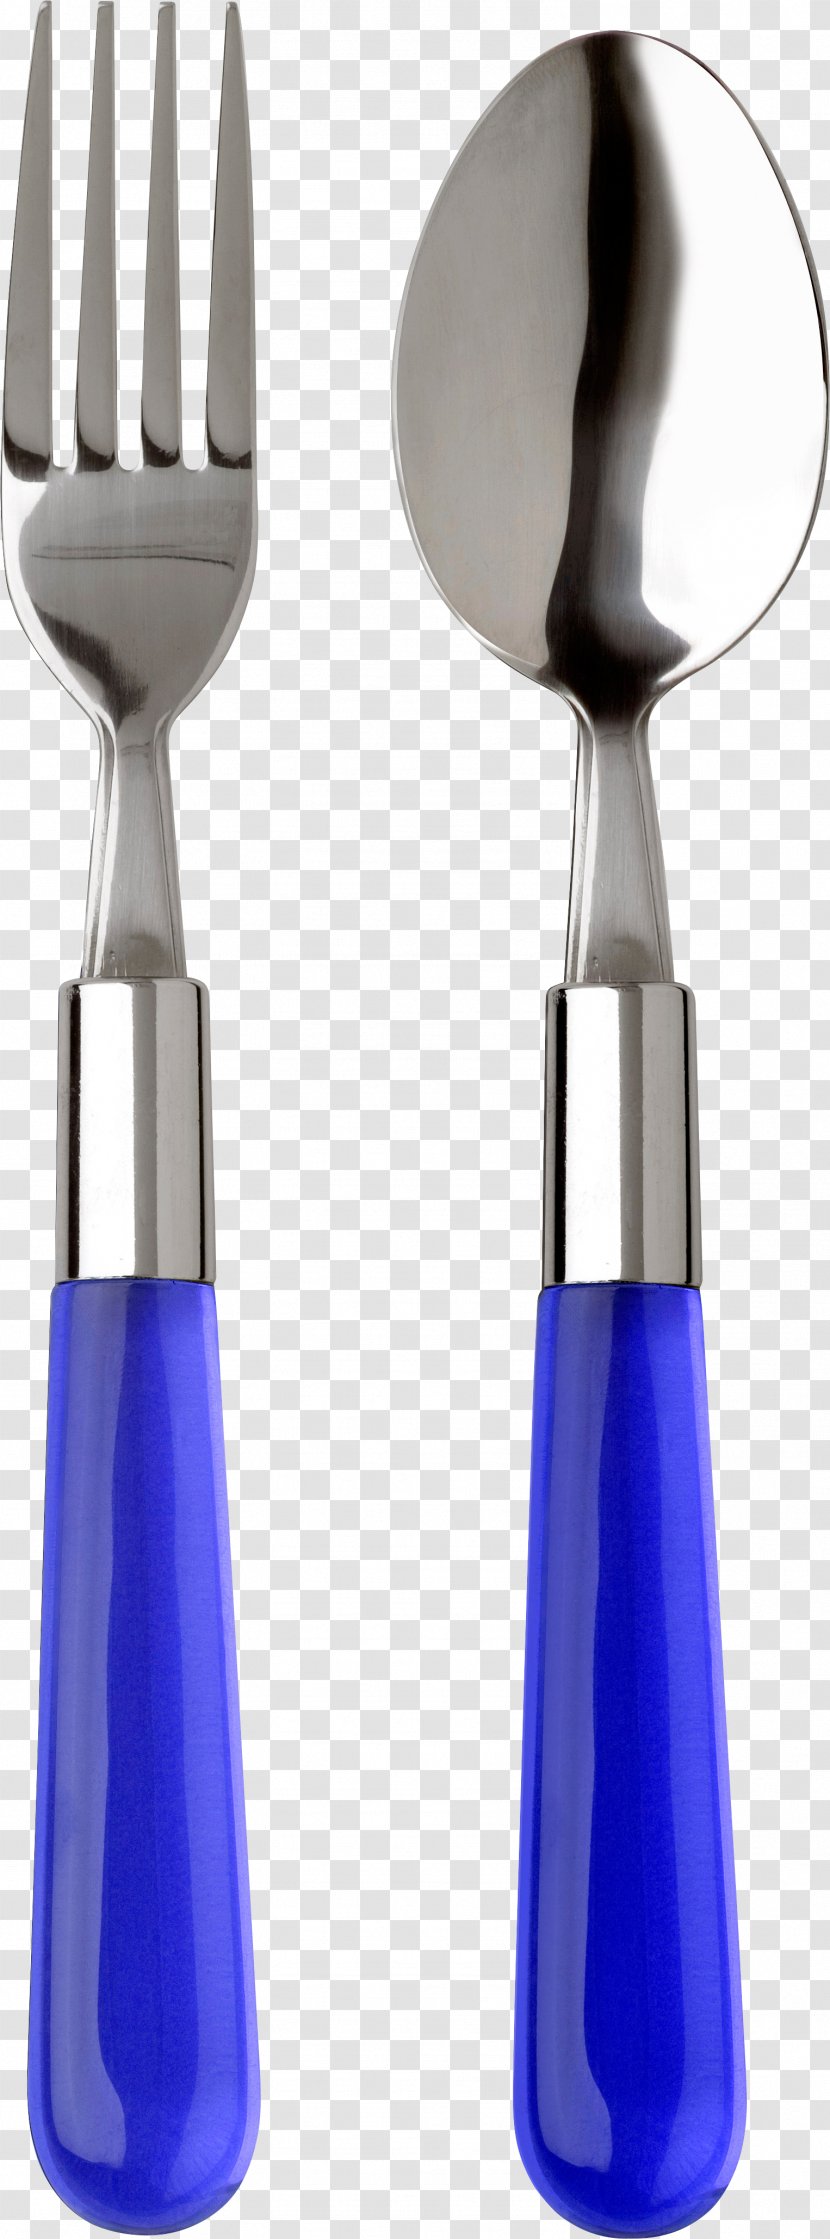 Fork Knife Spoon Spork - Product - And Images Transparent PNG